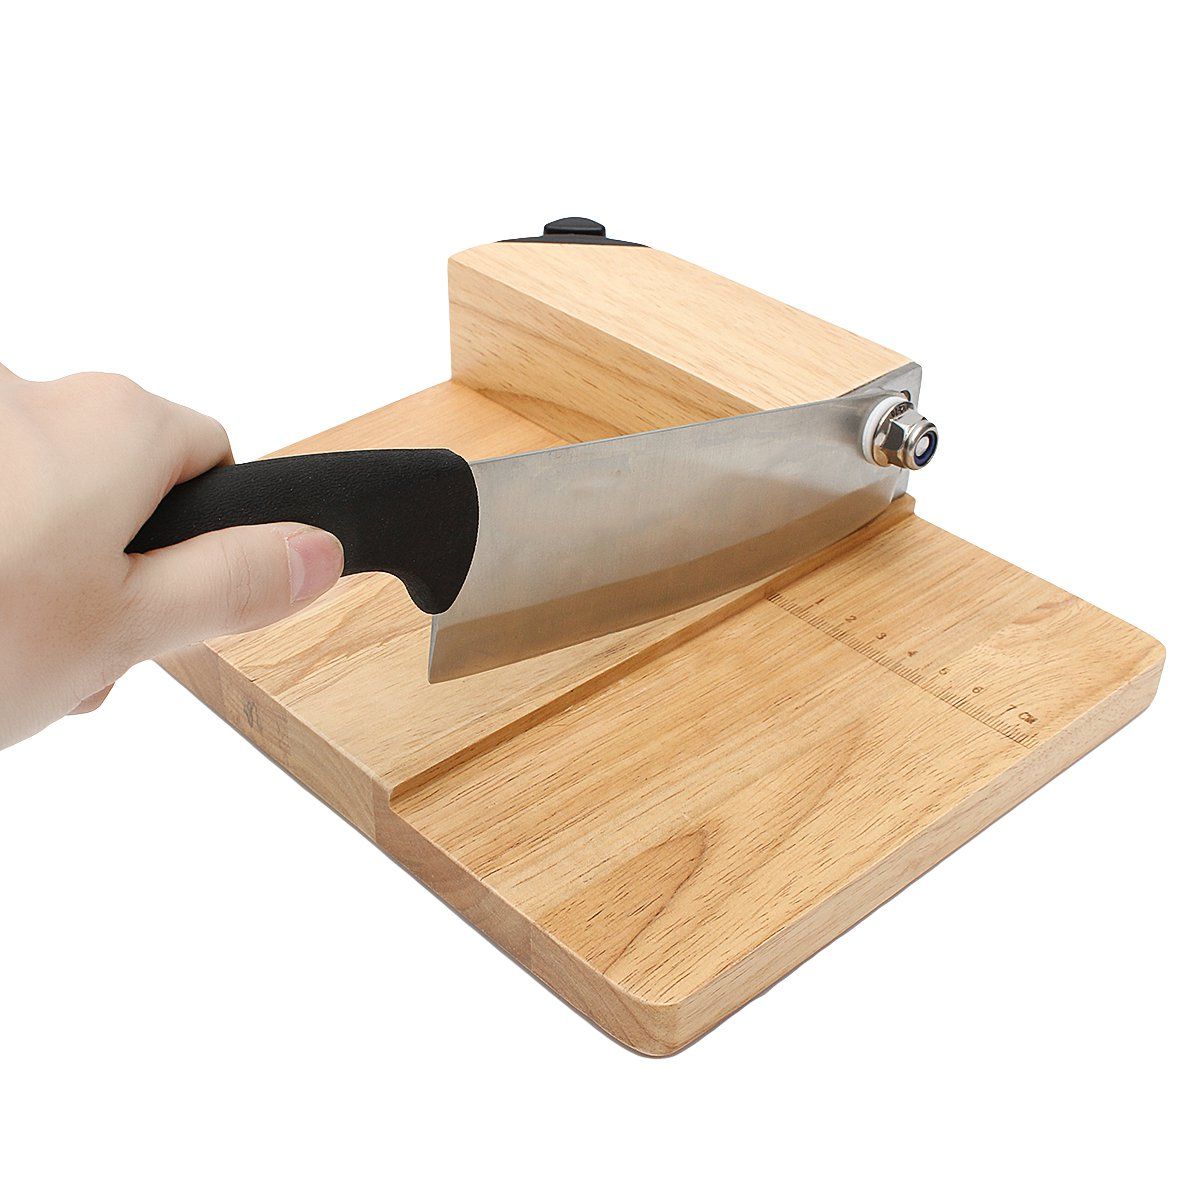 Biltong-Cutter-Jerky-Slicer-Slicer-With-Cutting-Board-1209060